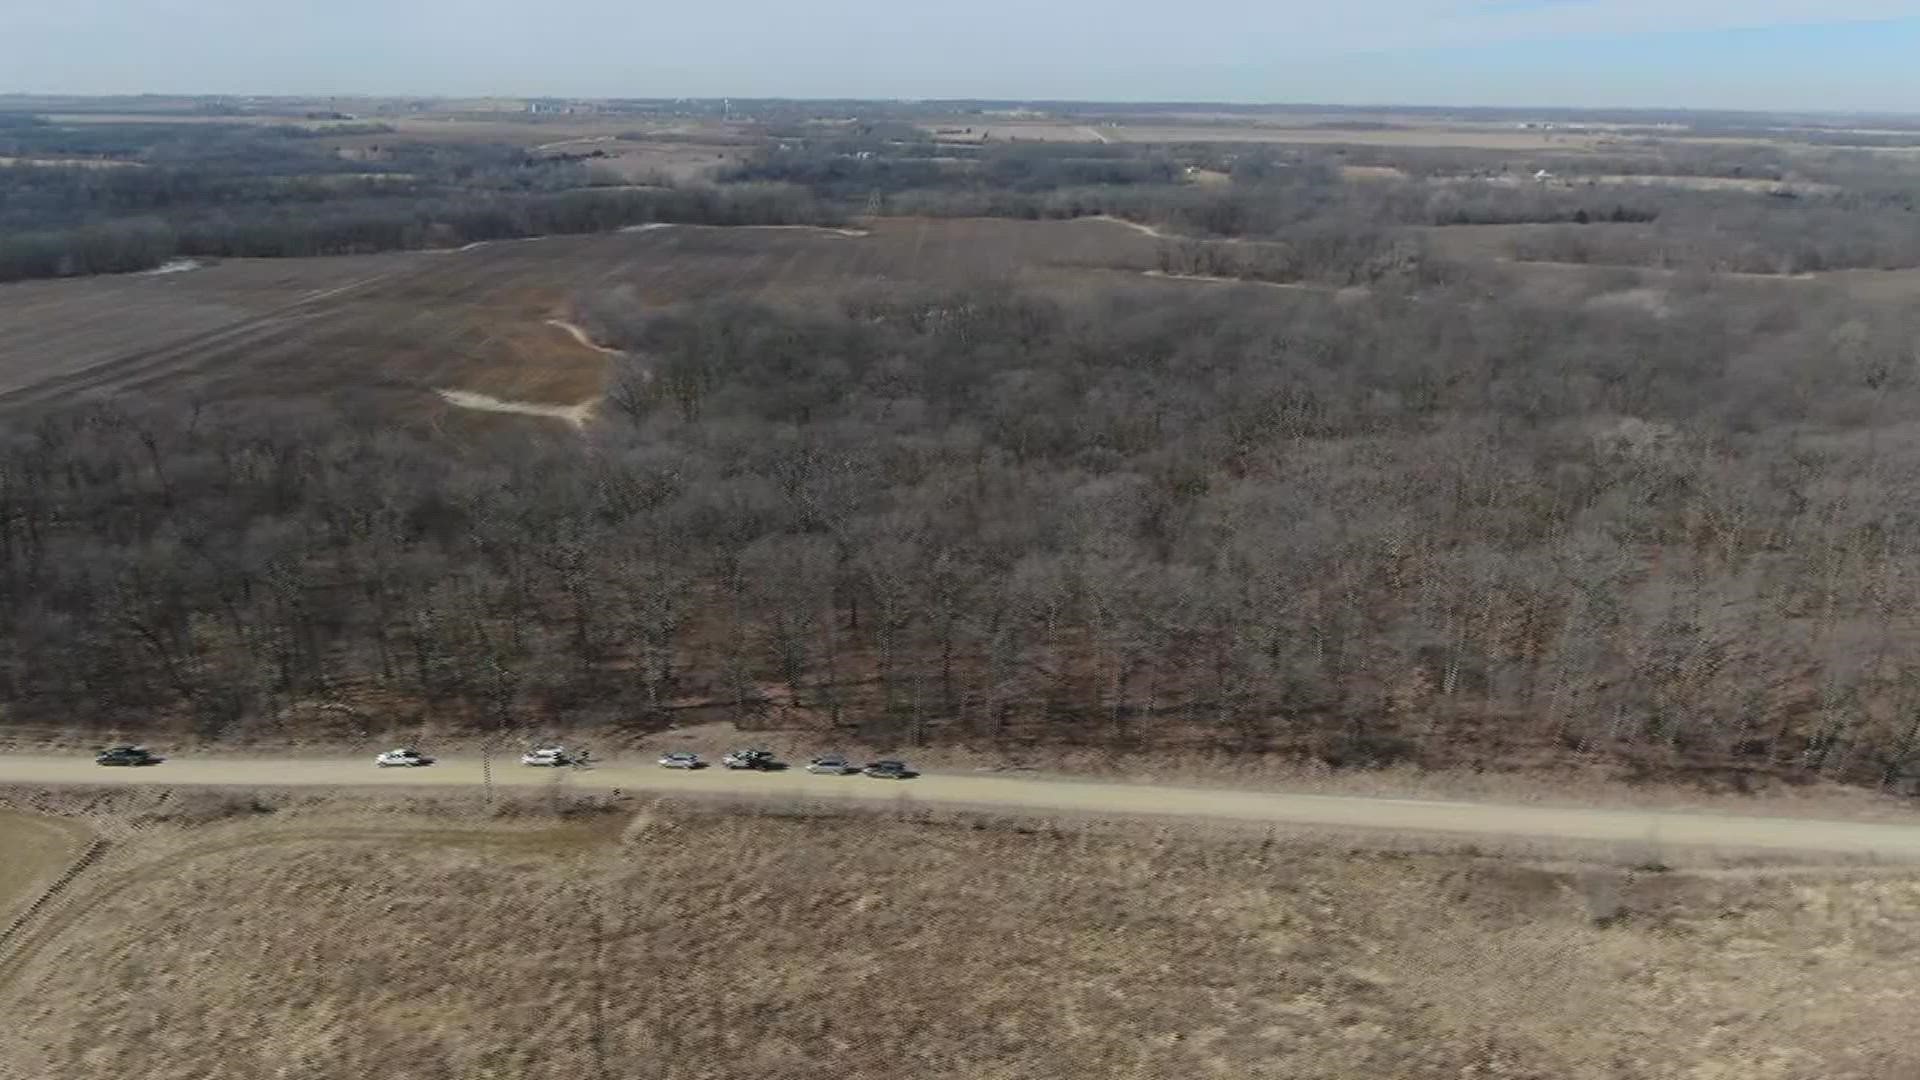 Just south of Wapello, IA, sits a small patch of public land known as Baird Timber. The county is now considering selling it, to fund new campsites at a nearby park.